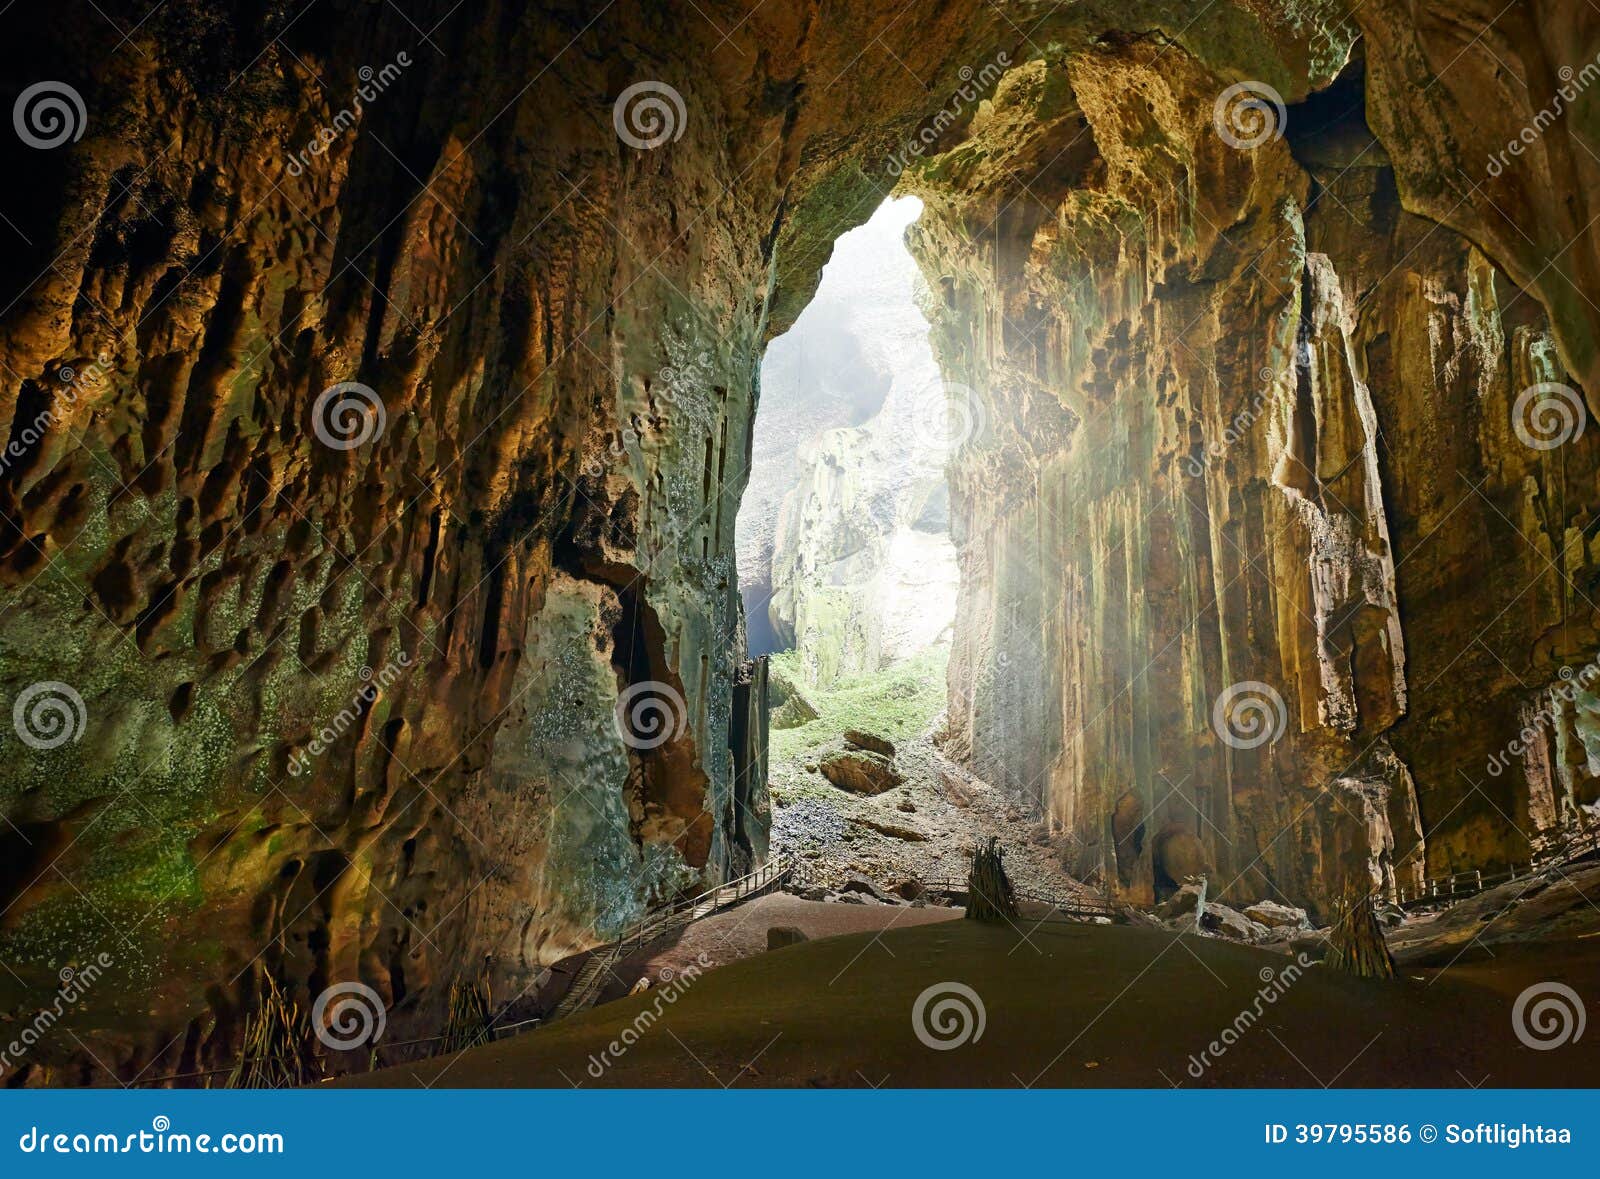 one of the most beautiful caves of borneo gomantong.malaysia